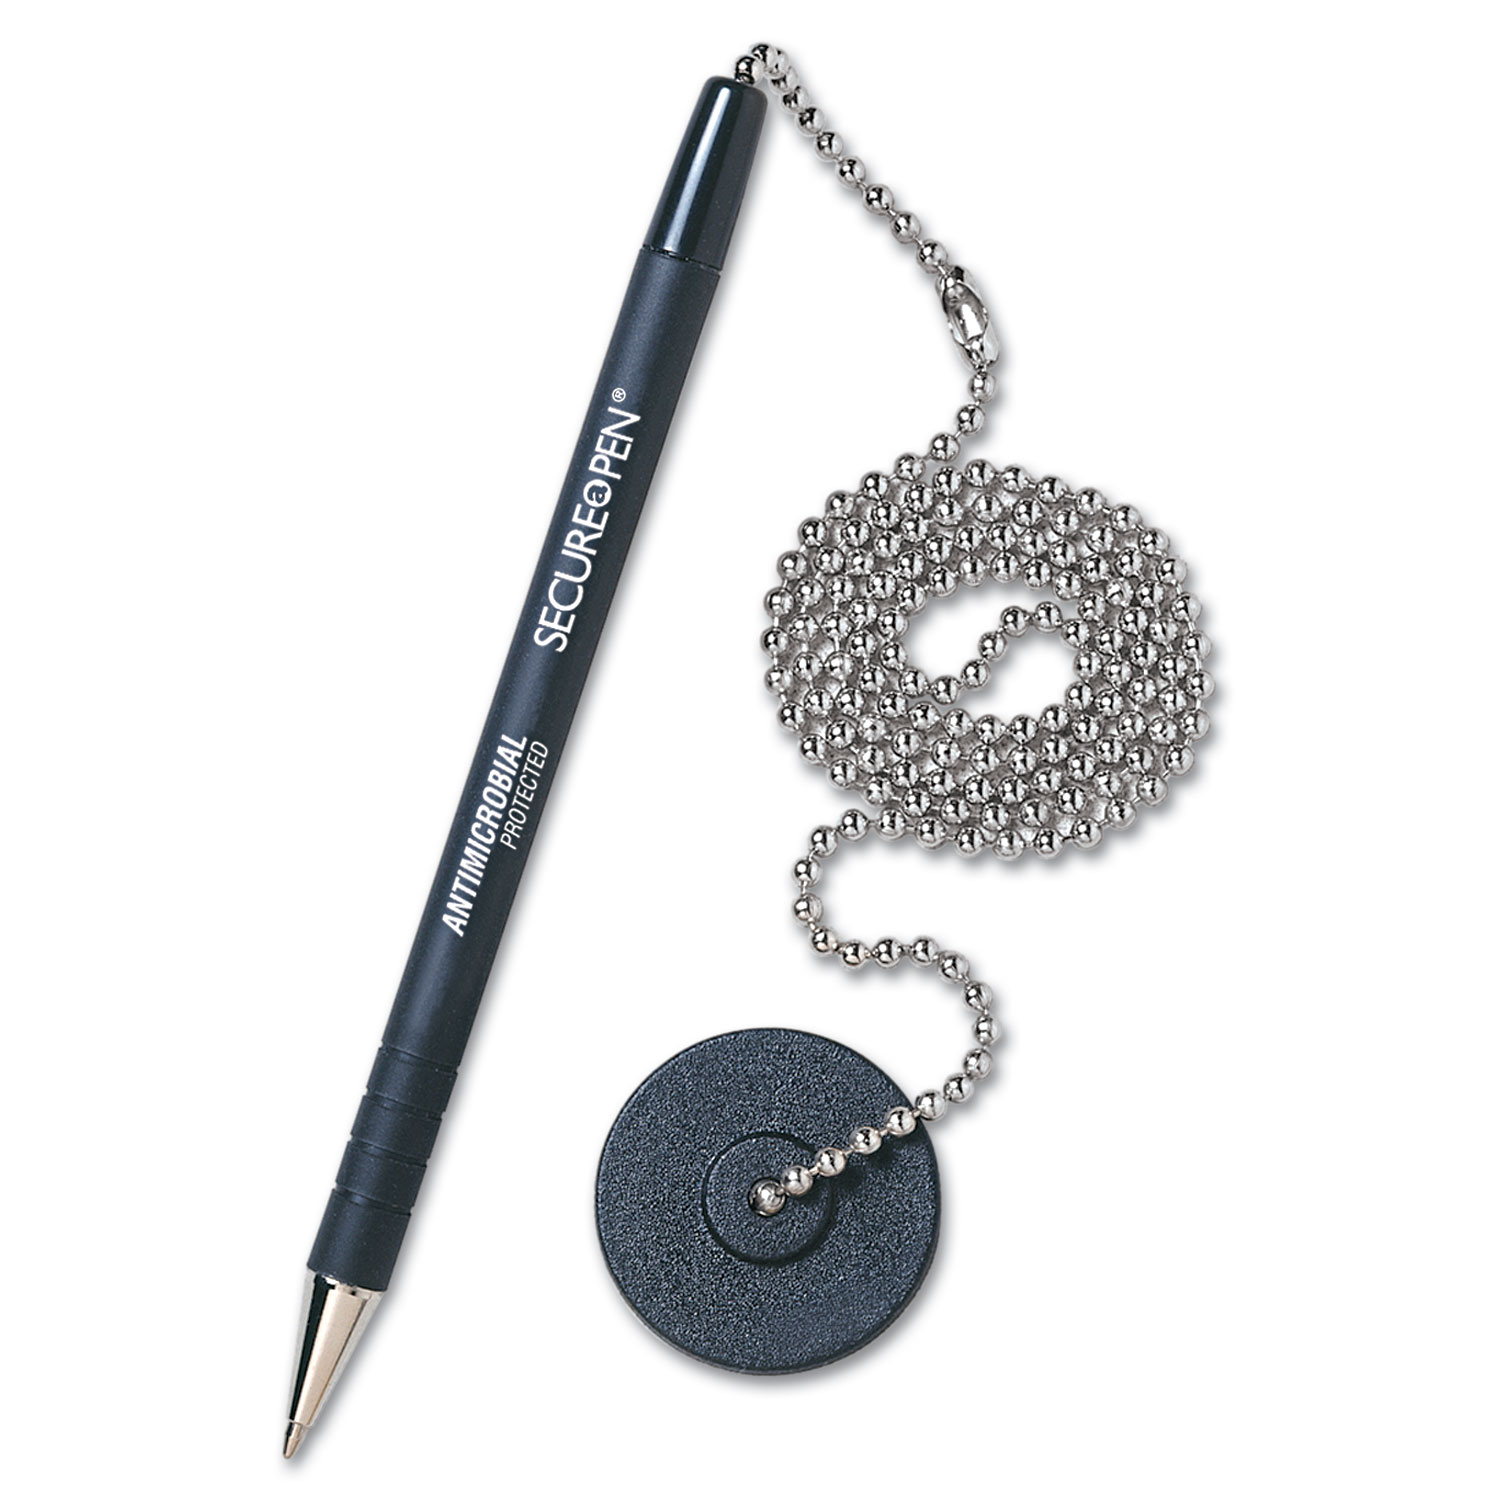  MMF Industries 28904 Secure-A-Pen Antimicrobial Ballpoint Counter Pen Kit with Round Base and 24 Ball Chain, 1mm, Black Ink/Barrel (MMF28904) 